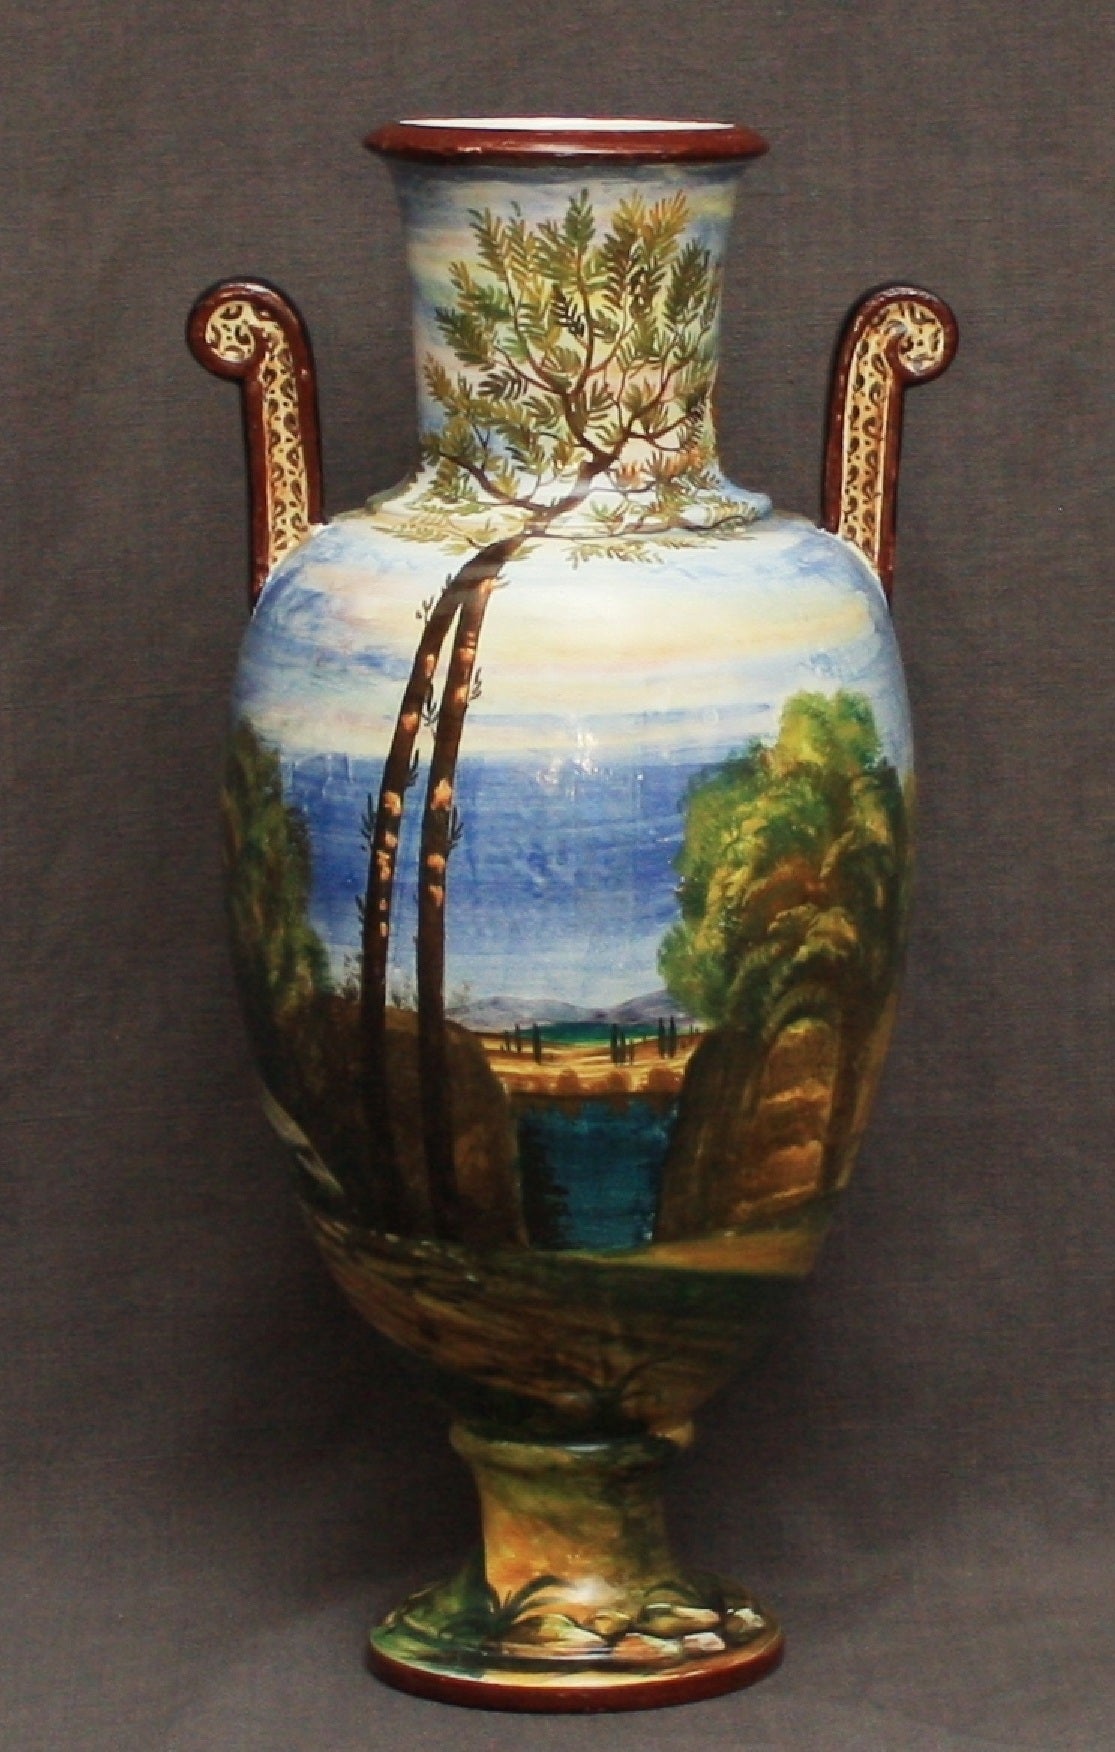 Mid-century Etruscan-style urn with painted scenes along the Amalfi coast with mythological figures on reverse.  Italy, circa 1940.
Dimension: 4.75" base diameter x 8.5" handle to handle x 17.25" height.